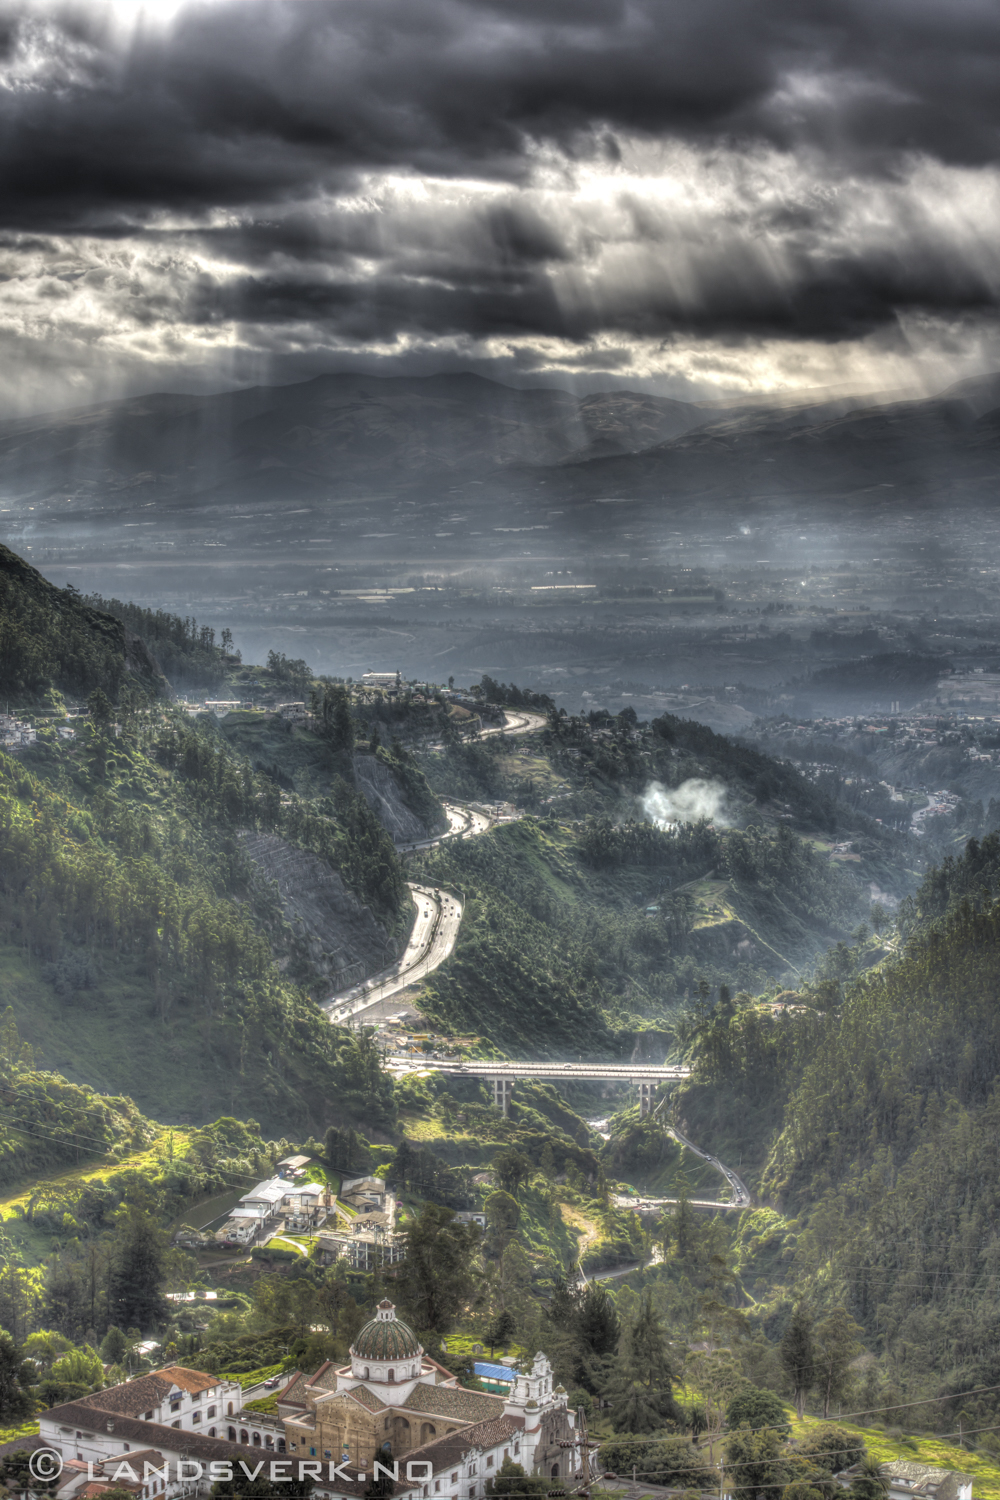 Quito countryside, Ecuador. HDR (duuh). 

(Canon EOS 5D Mark III / Canon EF 70-200mm f/2.8 L IS II USM)